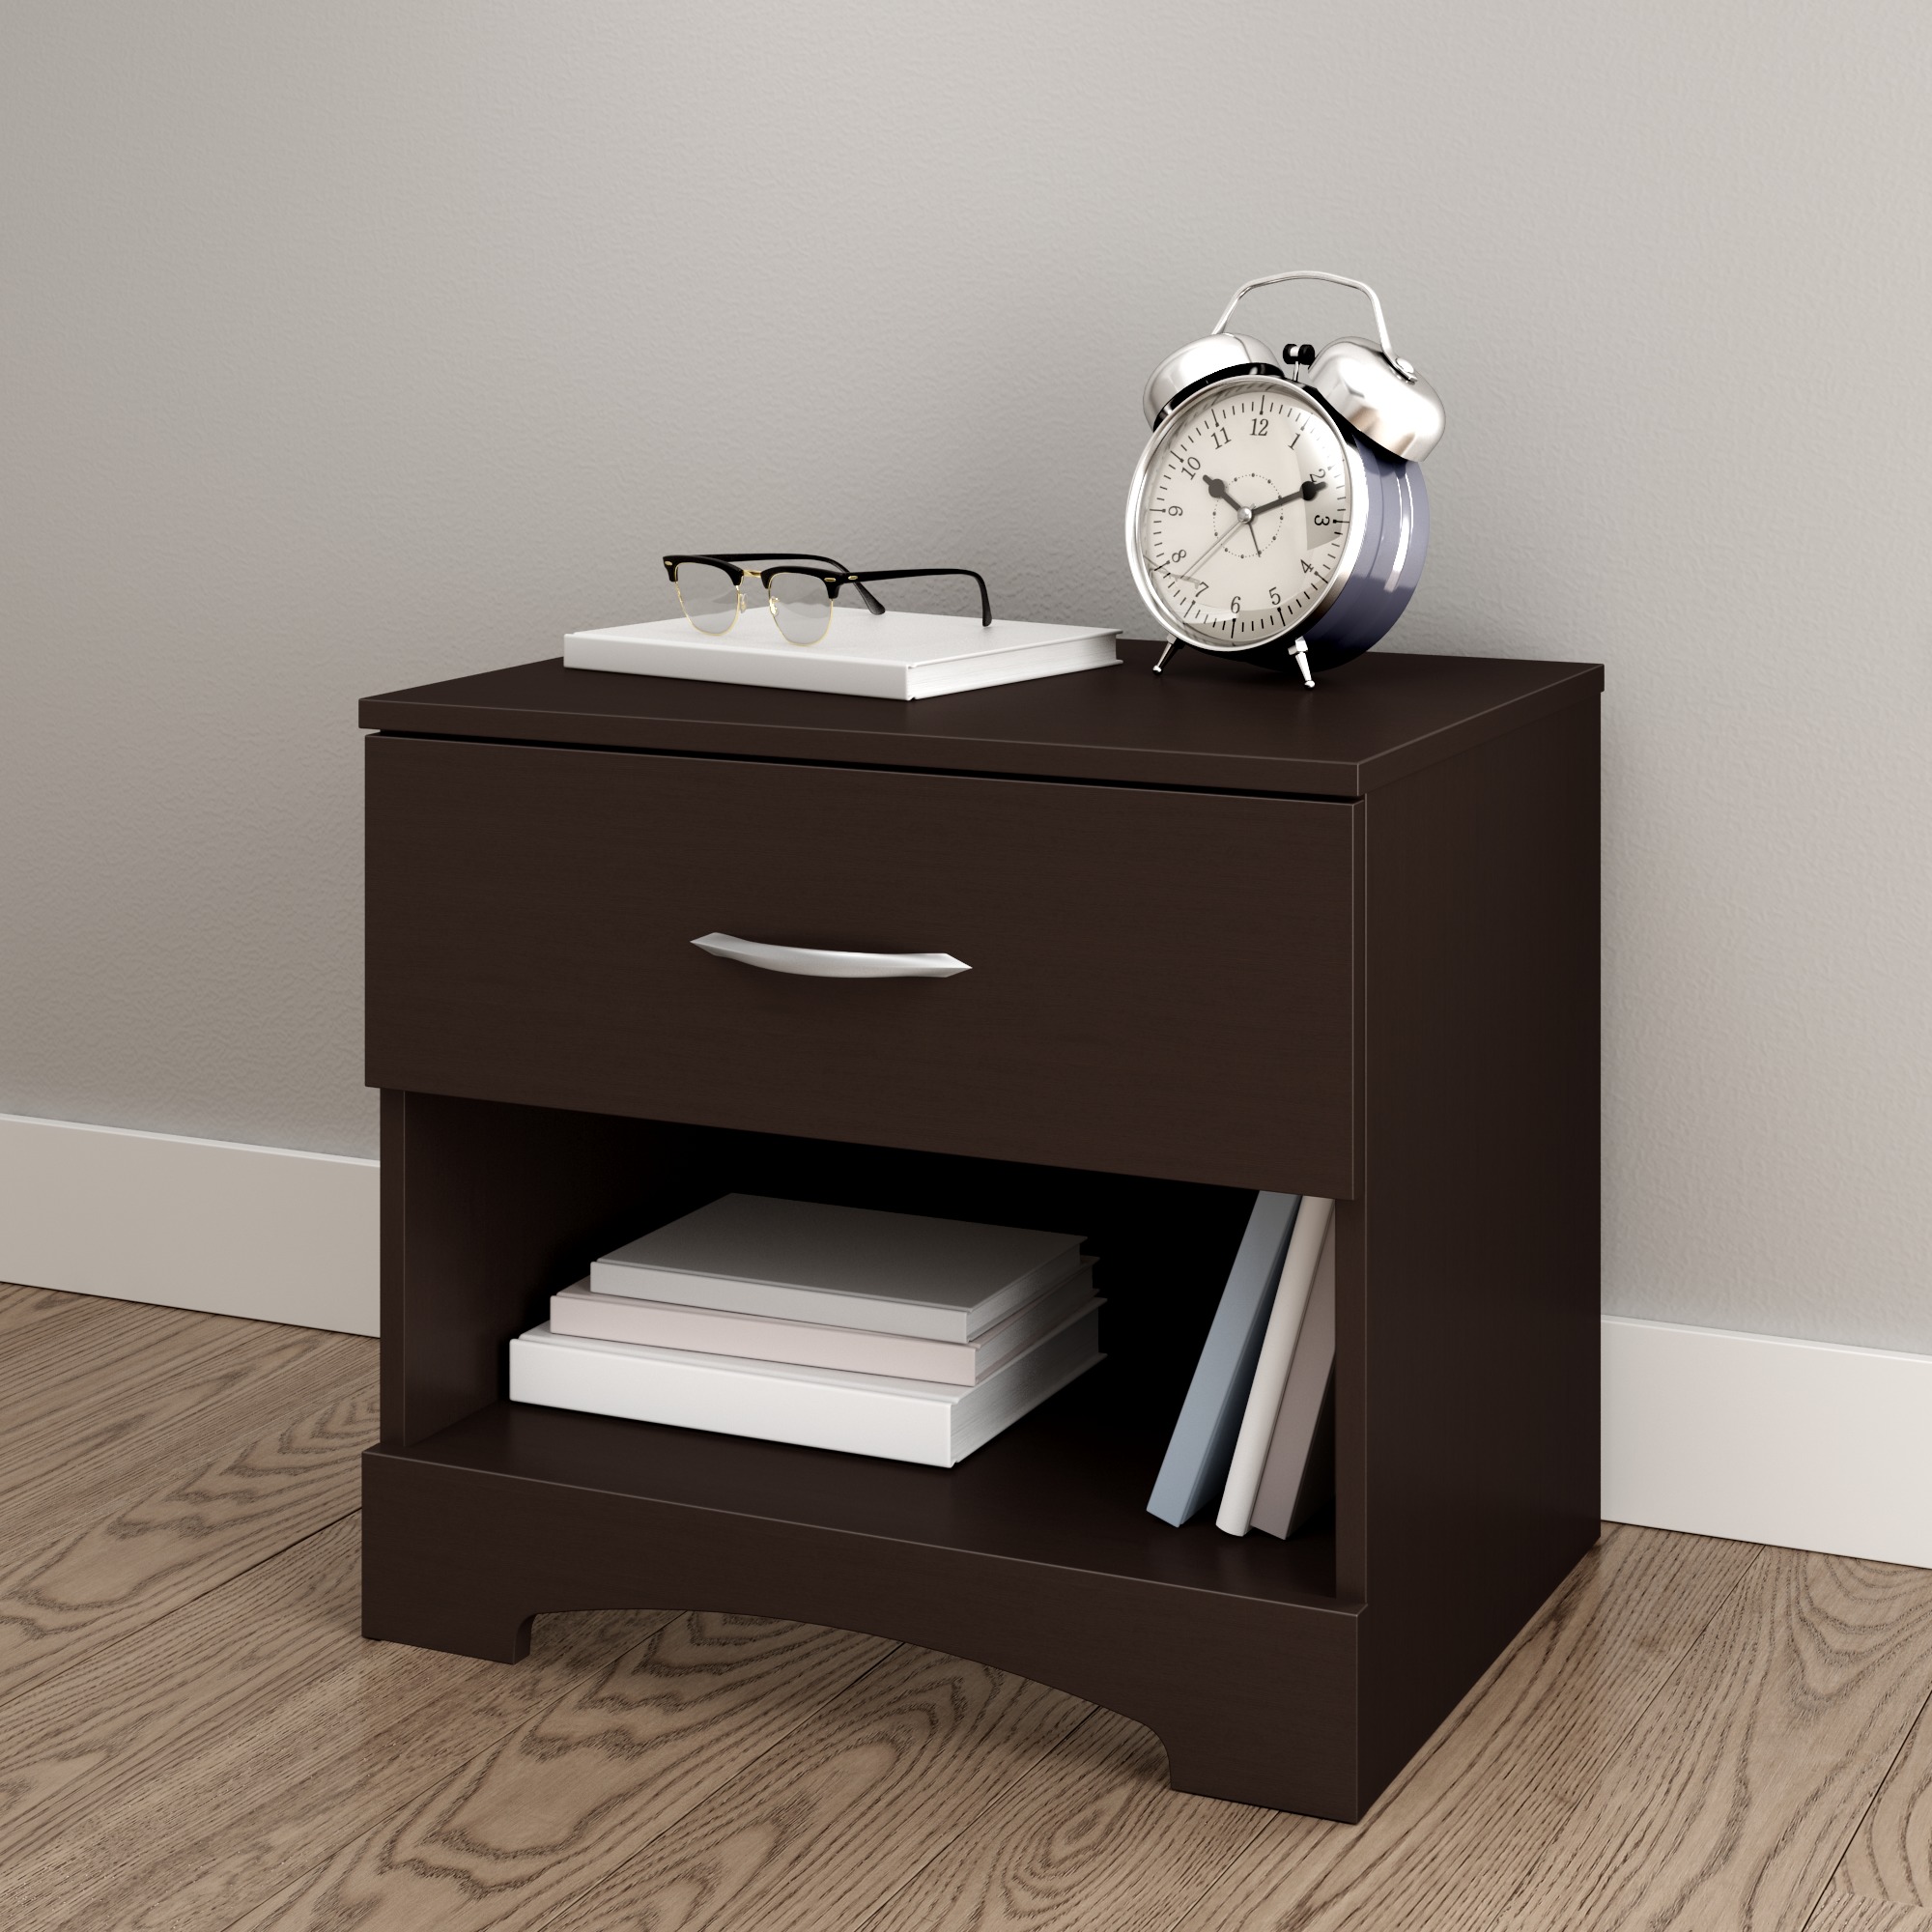 South Shore Step One 1-Drawer Nightstand - End Table with Storage Brown - image 1 of 11